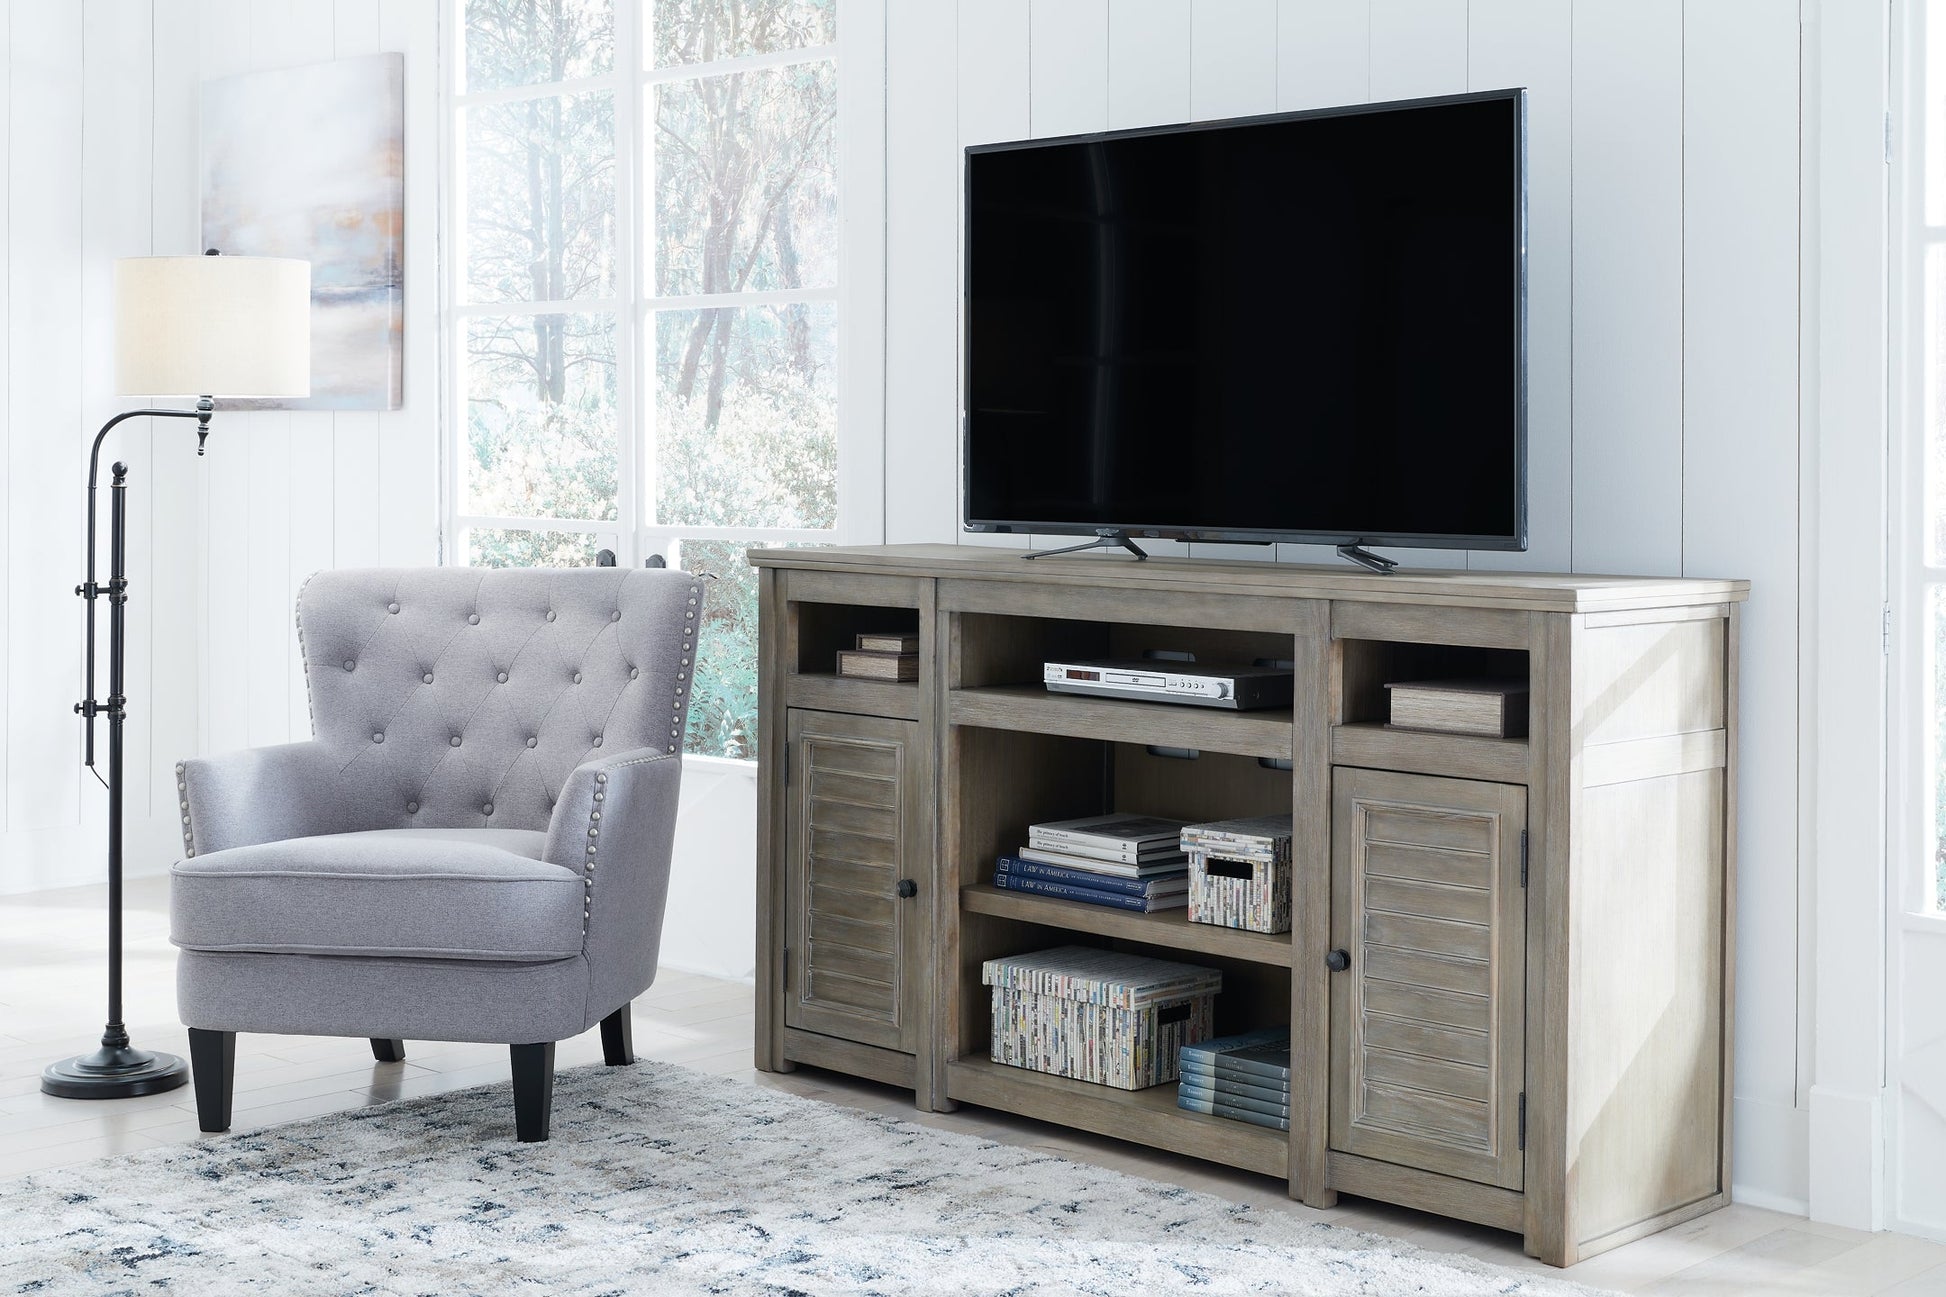 Moreshire XL TV Stand w/Fireplace Option at Cloud 9 Mattress & Furniture furniture, home furnishing, home decor